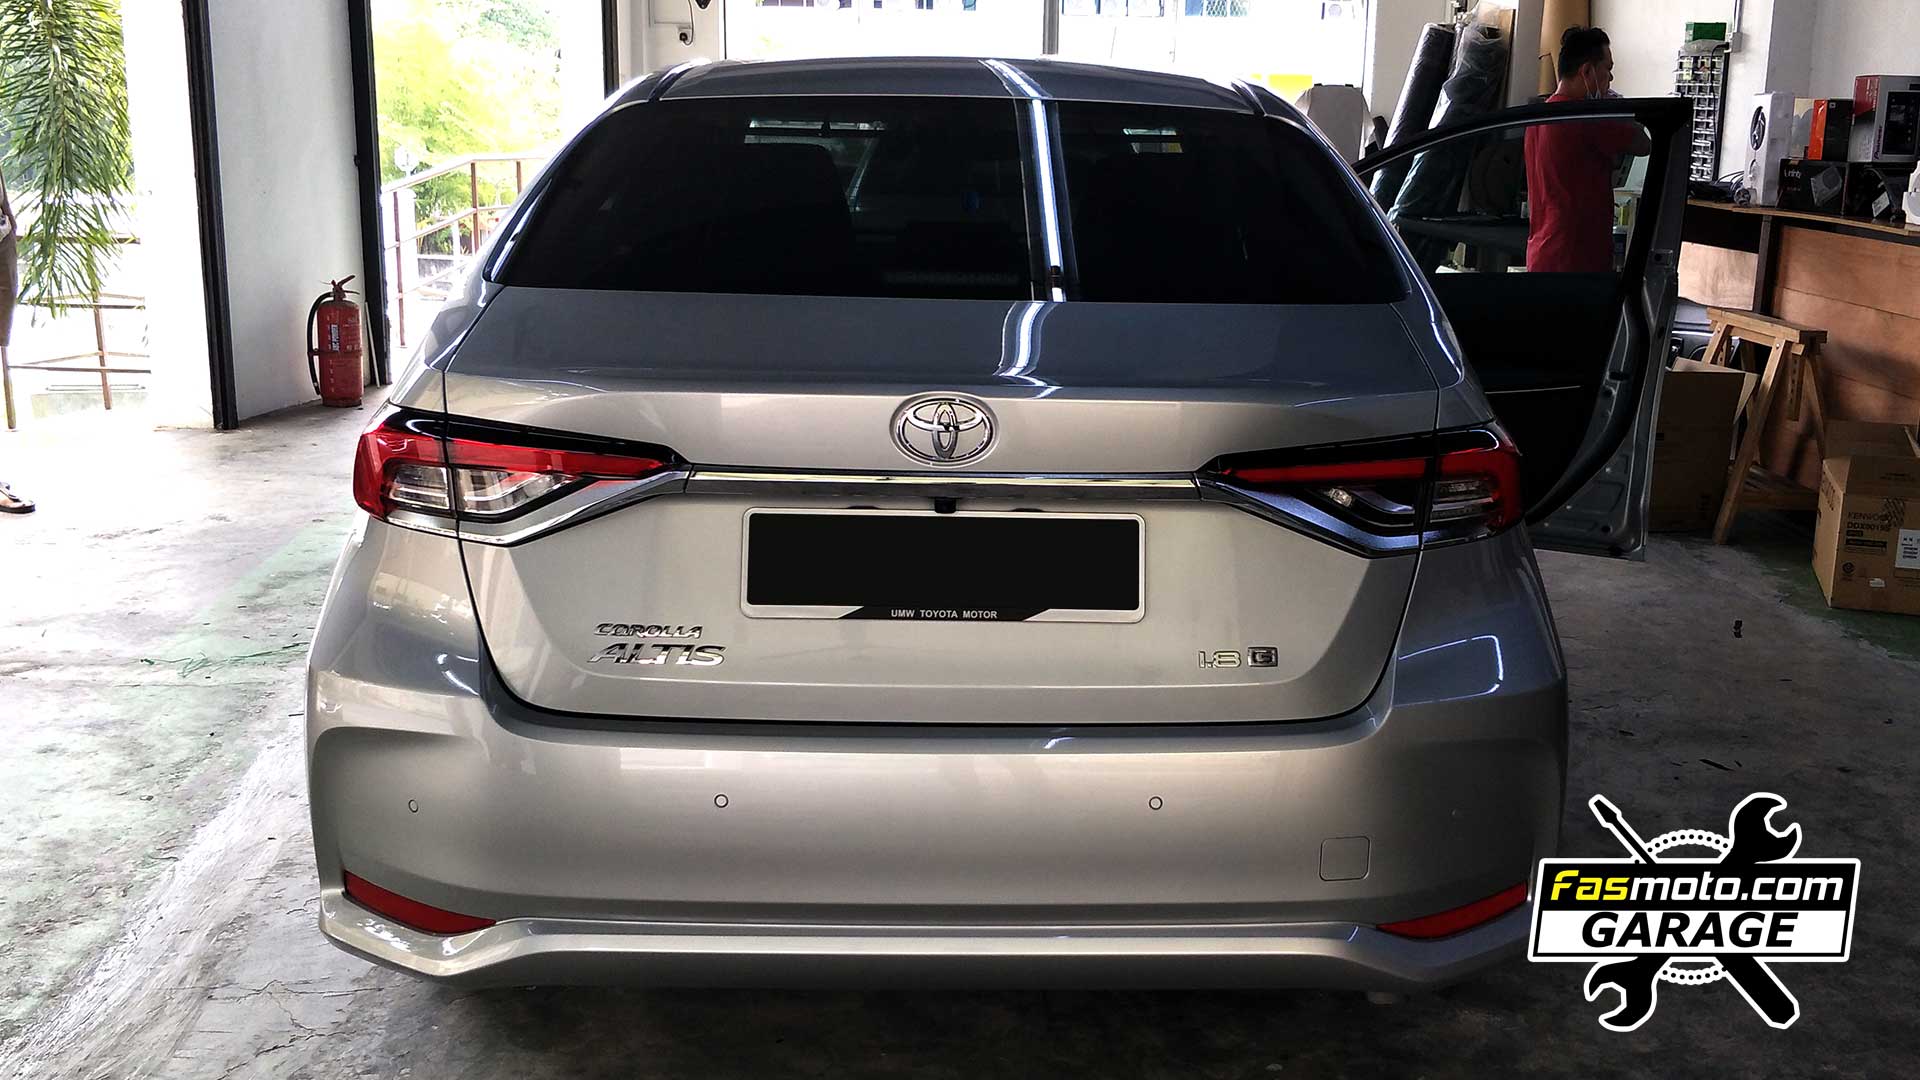 Toyota Corolla Altis 12th Gen E210 Kenwood DDX919WS with 360 Camera Retained